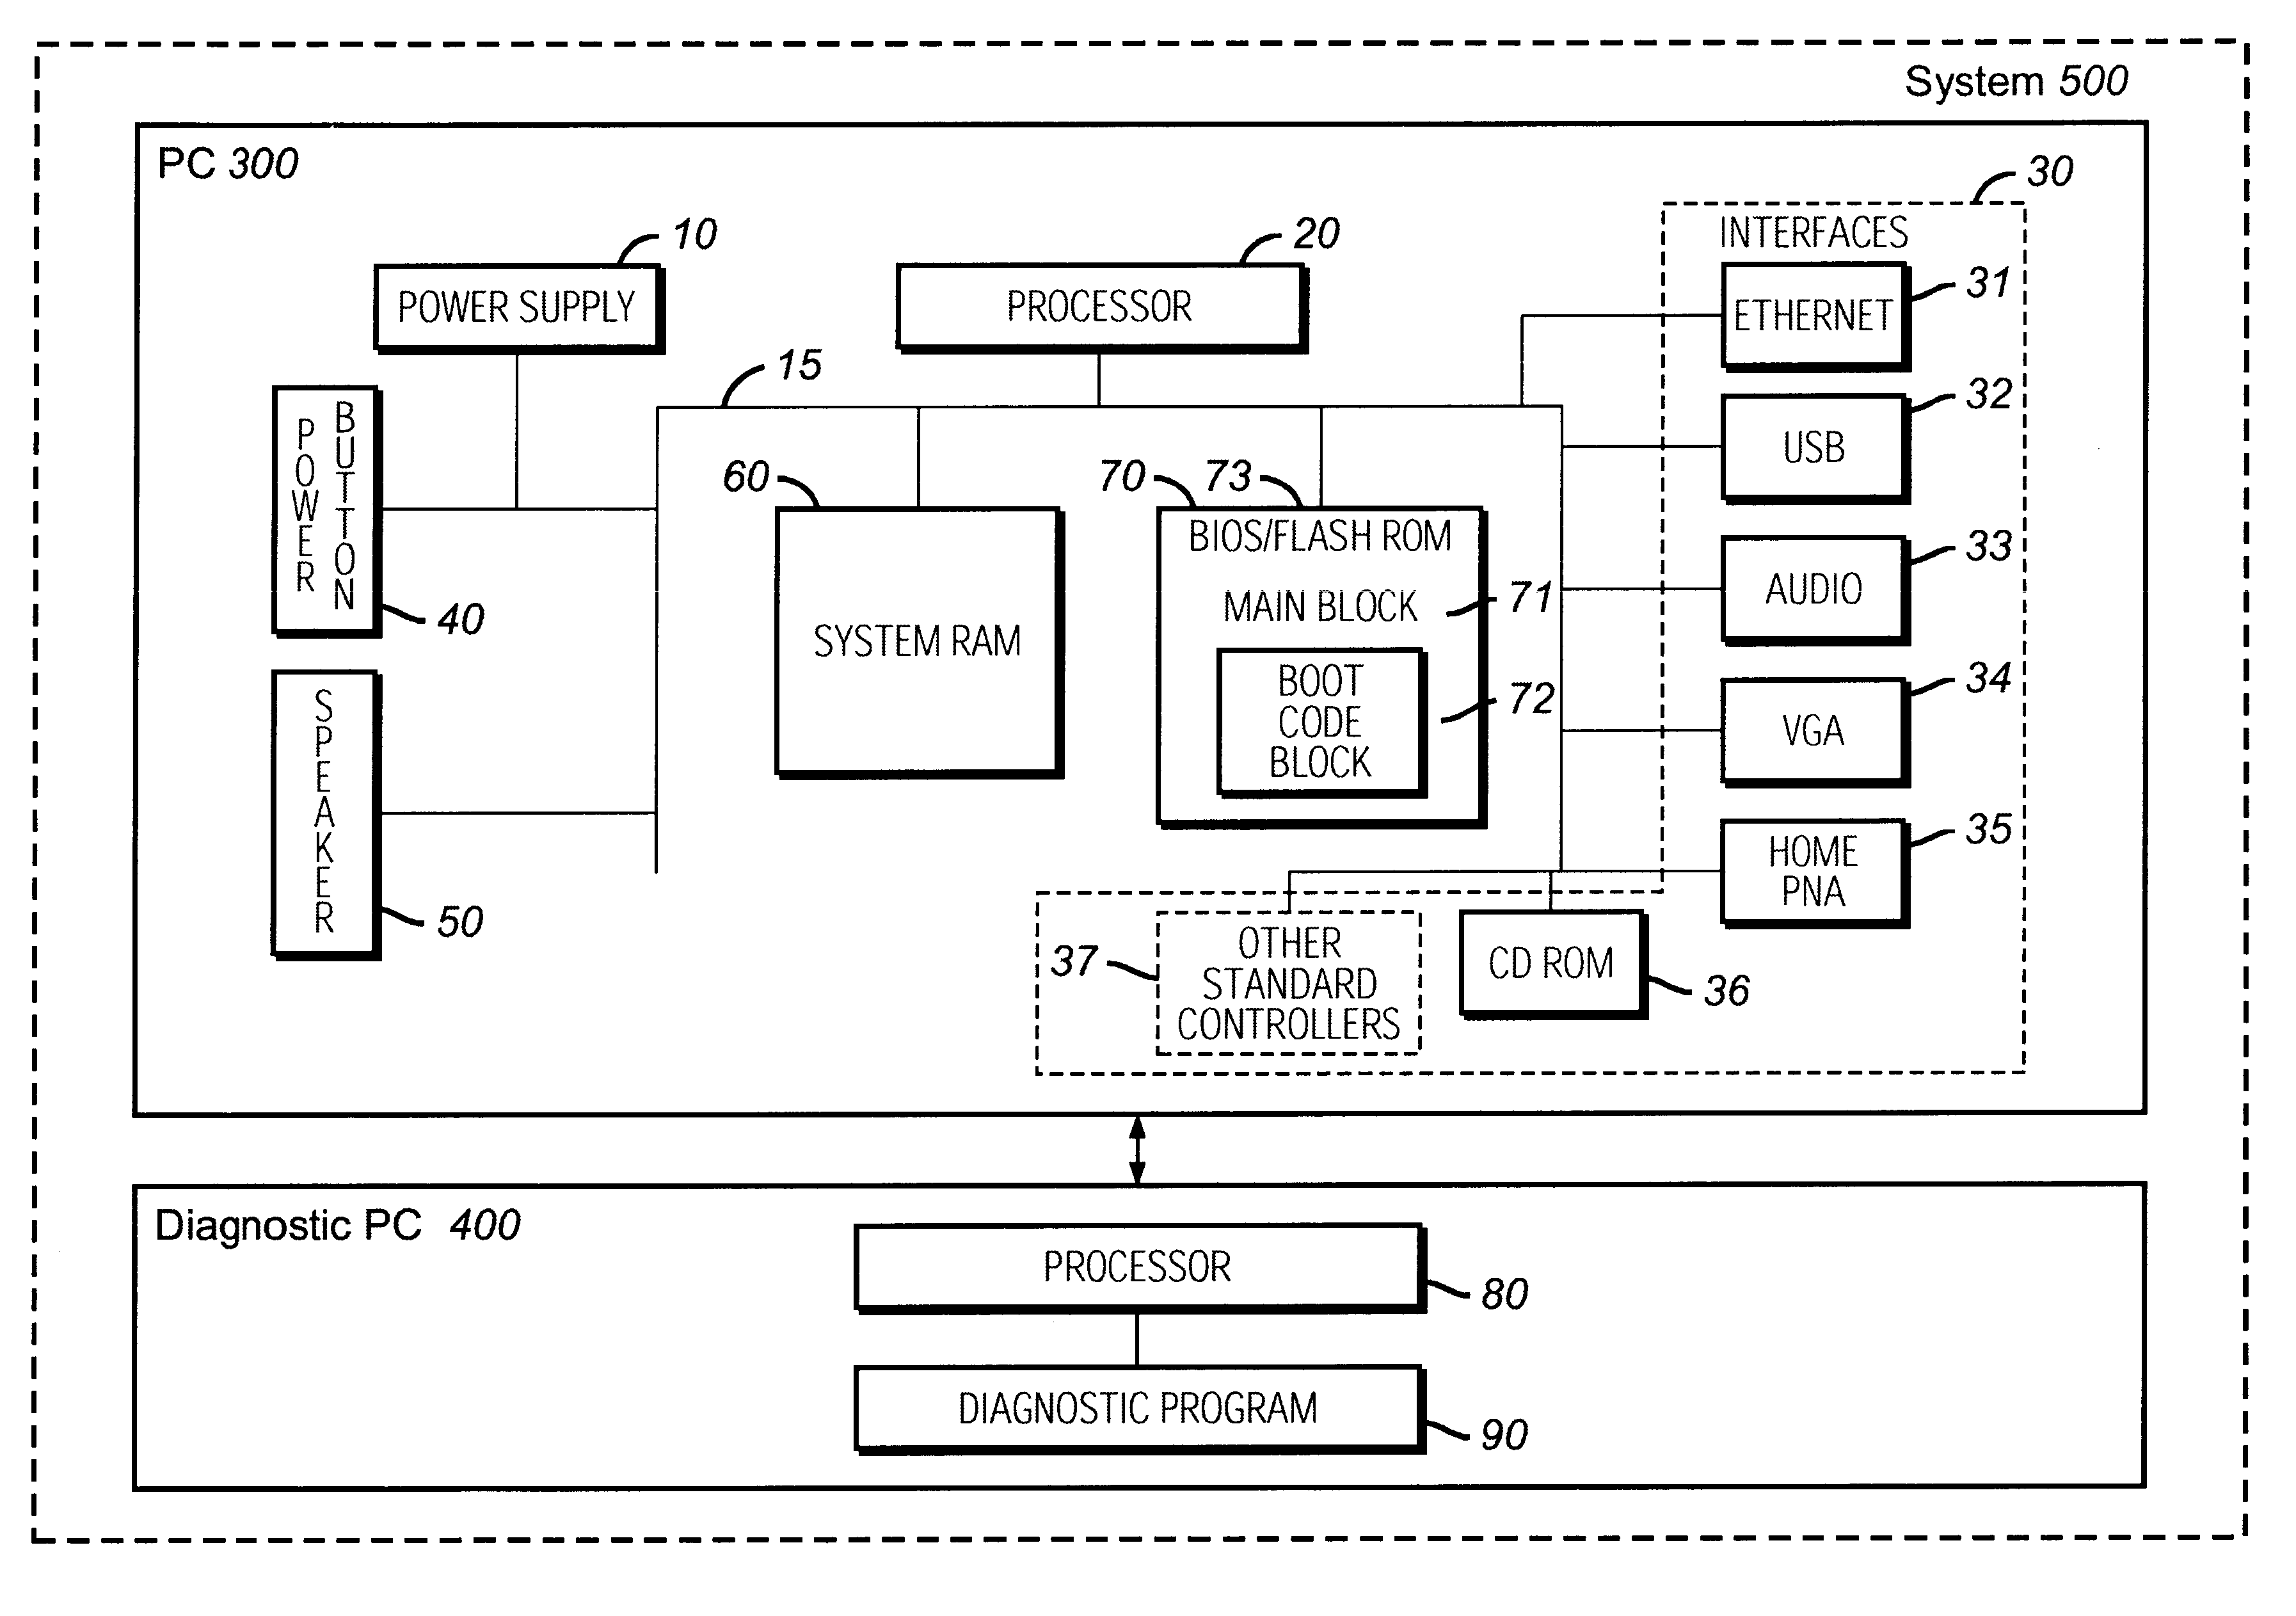 Power button controlled diagnostic mode for an information appliance